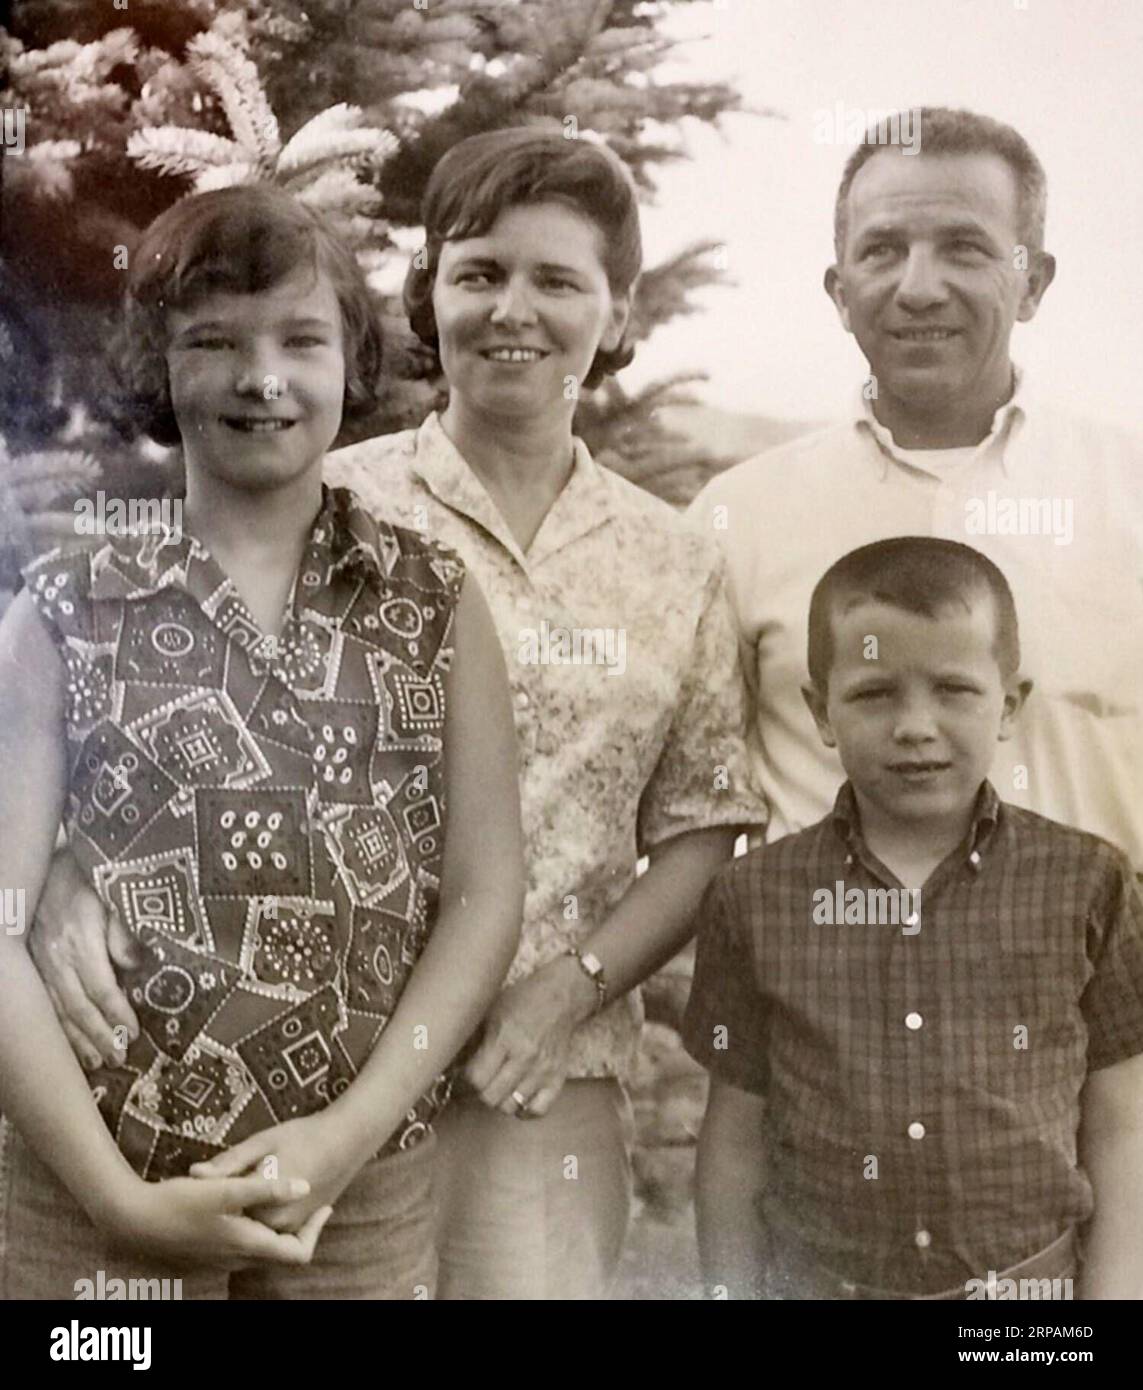 (190514) -- NEW YORK, May 14, 2019 -- James E. Bryant (R, rear), his wife Dorothy Bryant (L, rear), daughter Babs Bryant (L, front) and son James Bryant are pictured in Colorado, the United States, 1964. James Bryant will never forget the day when his 93-year-old father went back to his bedroom and came back with a flight brief case containing papers related to the training and assignments he took as a U.S. Flying Tiger pilot during the World War II. As a remarkable yet humble man and a loving father, James E. Bryant did not show any detailed evidence about his war experience until about three Stock Photo